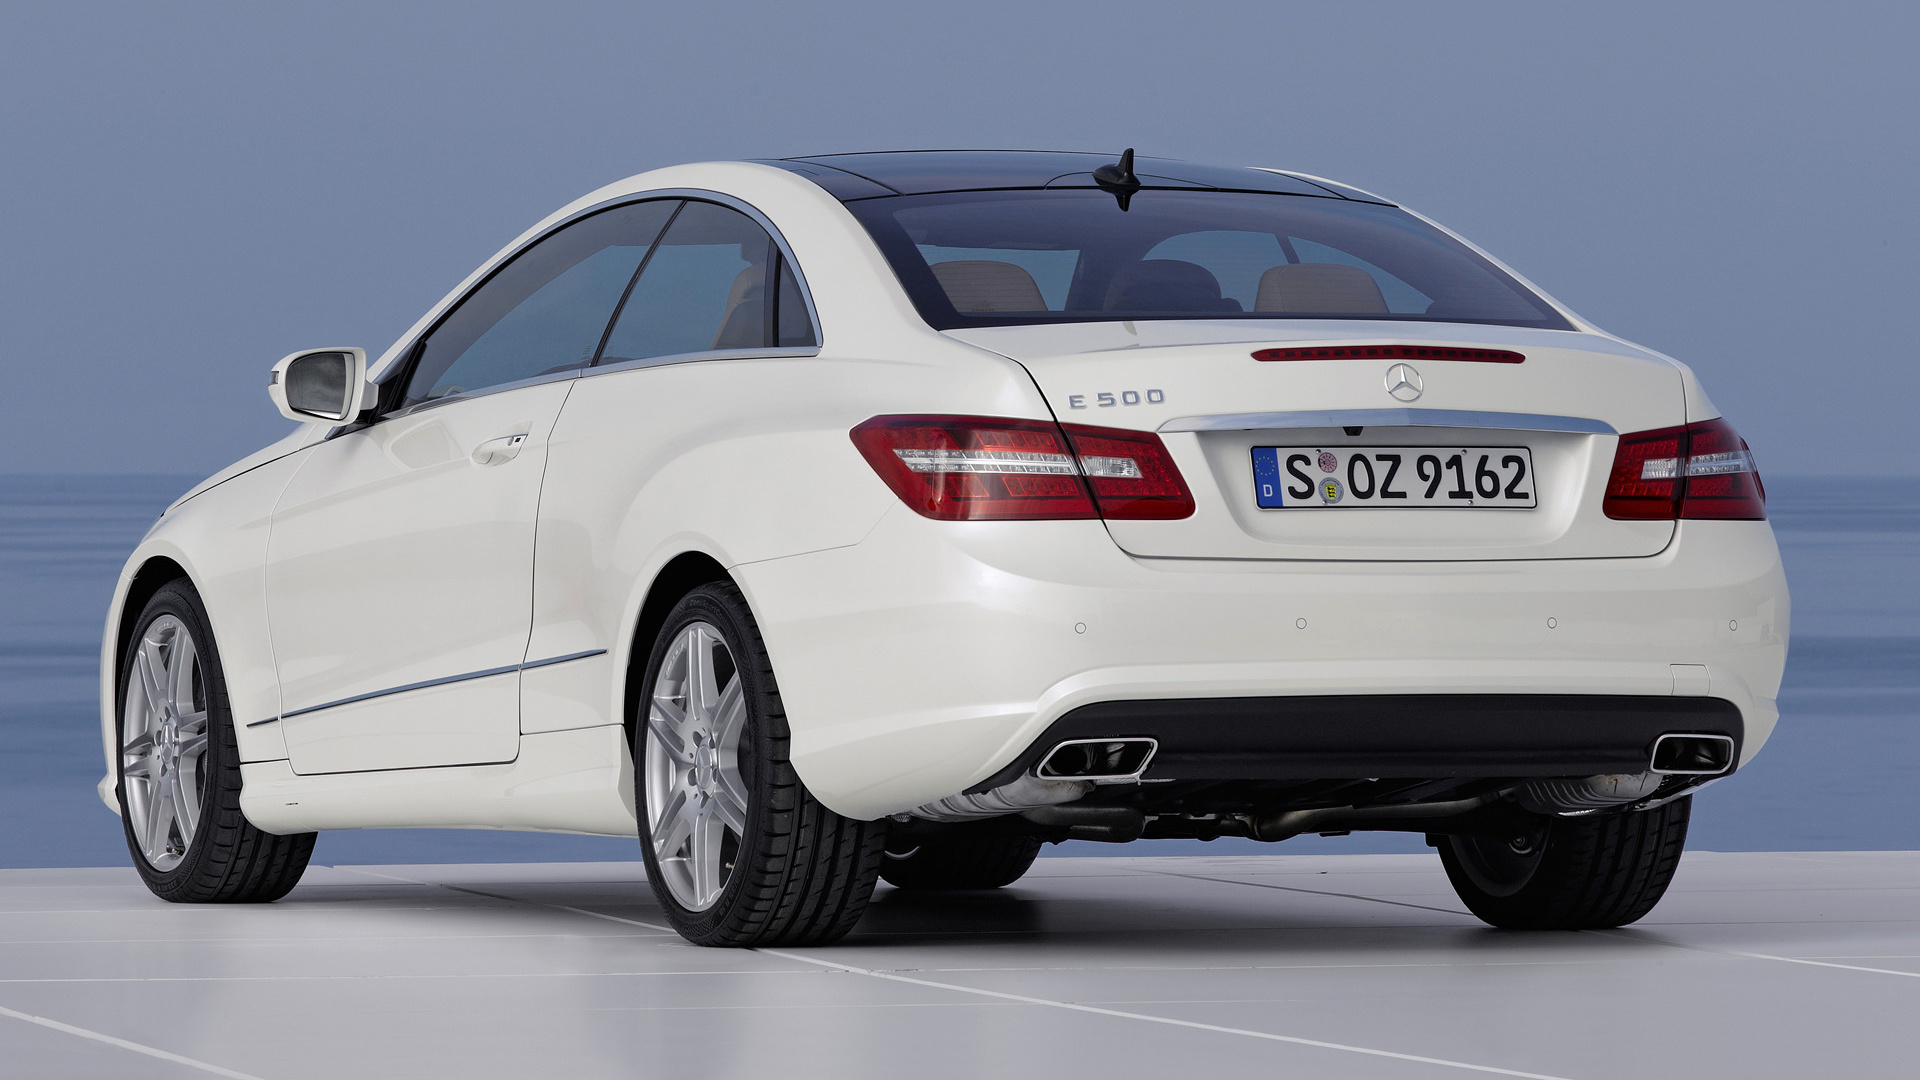  Mercedes Benz E 500 Coupe Amg Styling HQ Background Wallpapers